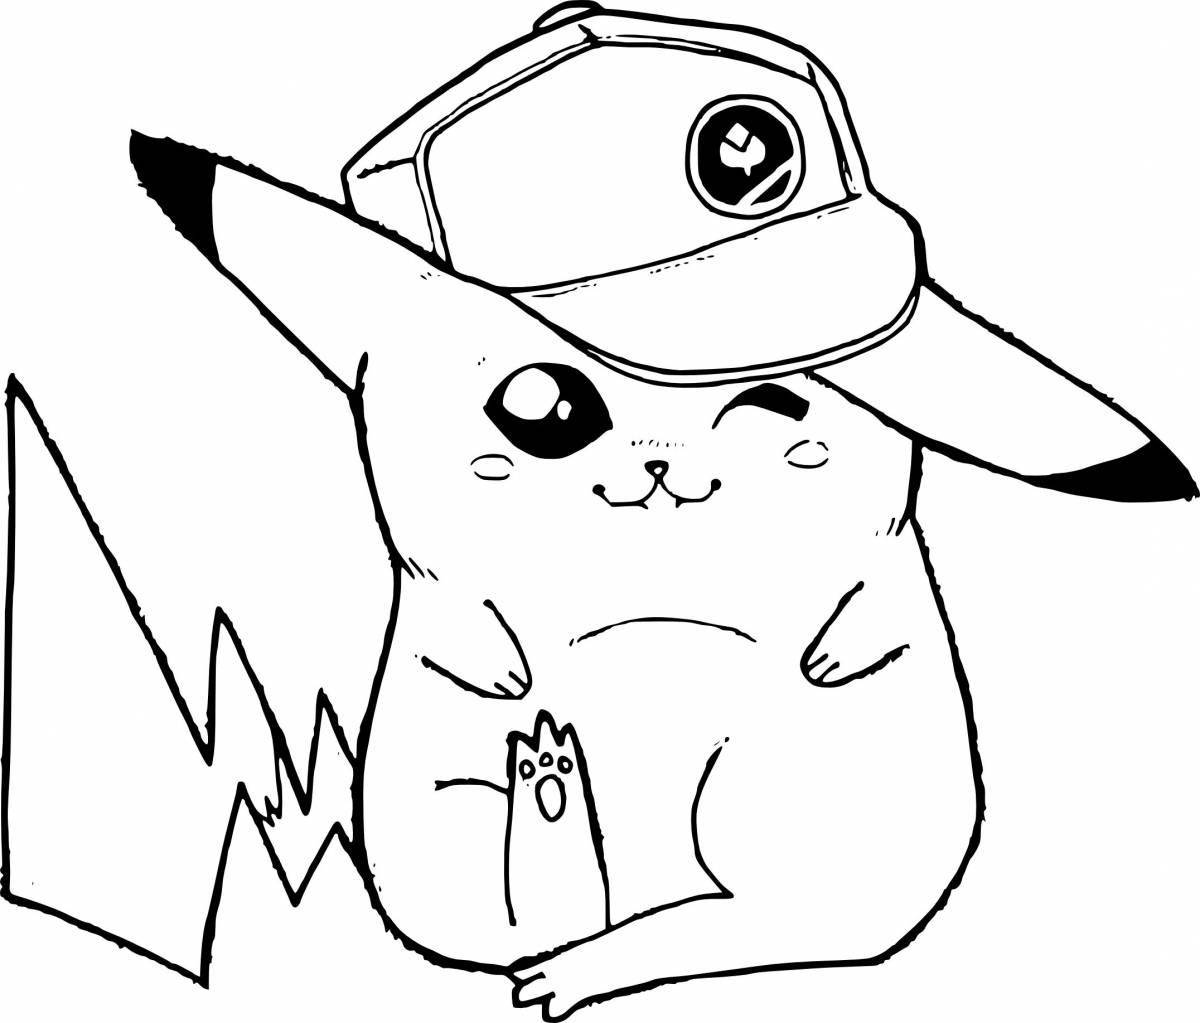 Funny pikachu coloring book